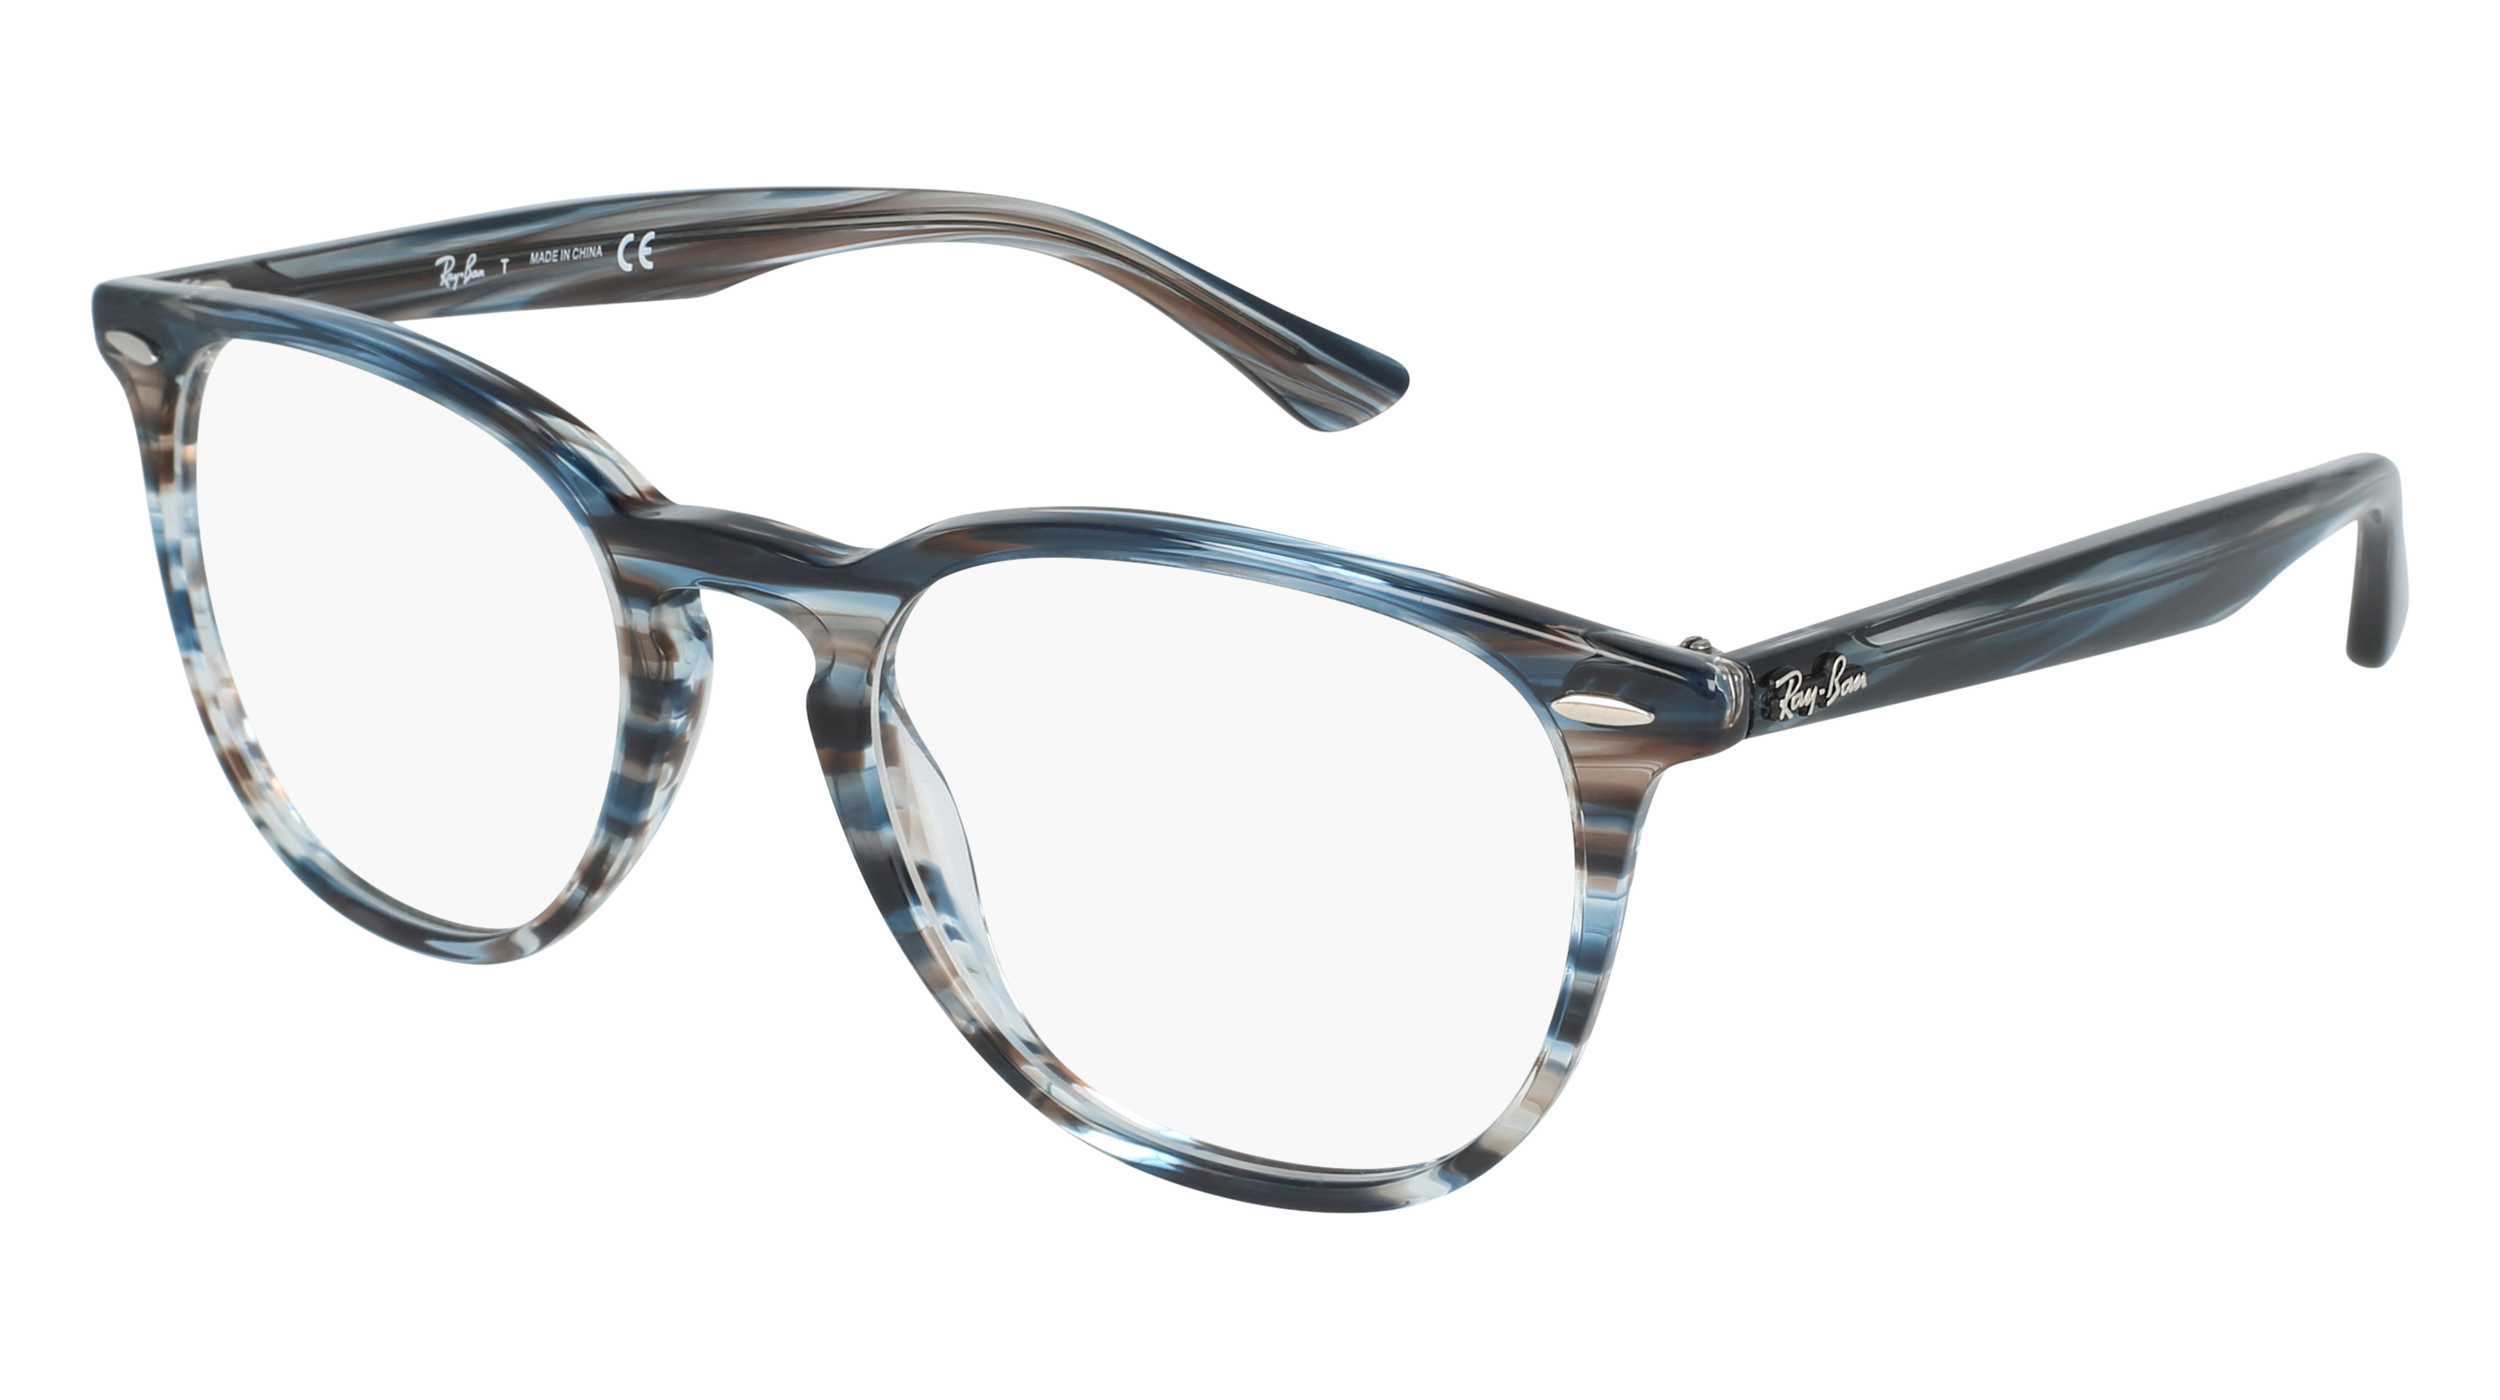 R RB 7159 unisex's eyeglasses (from the side)